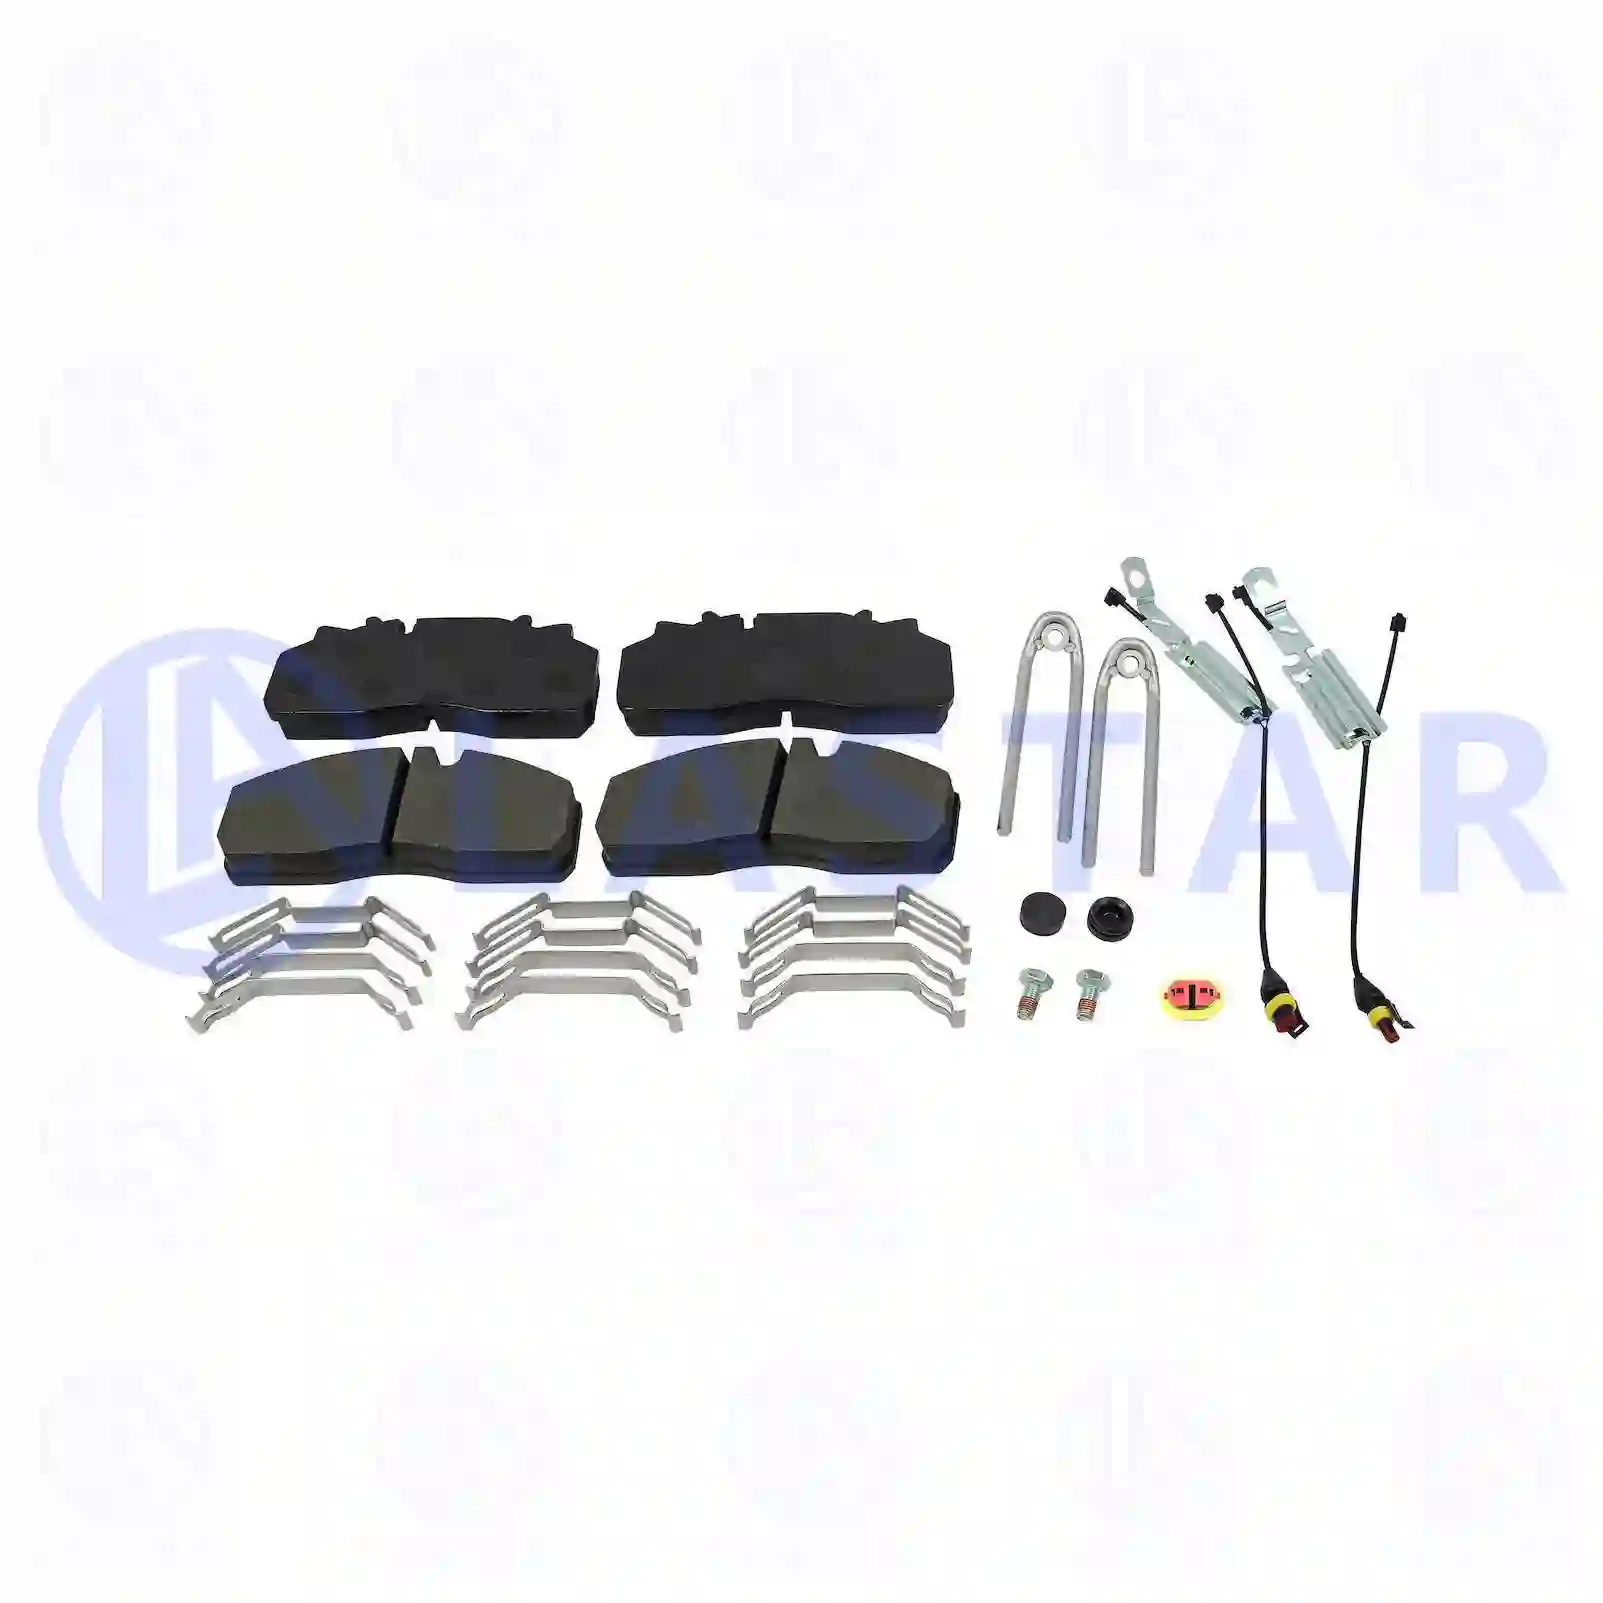  Disc brake pad kit, with wear indicators || Lastar Spare Part | Truck Spare Parts, Auotomotive Spare Parts